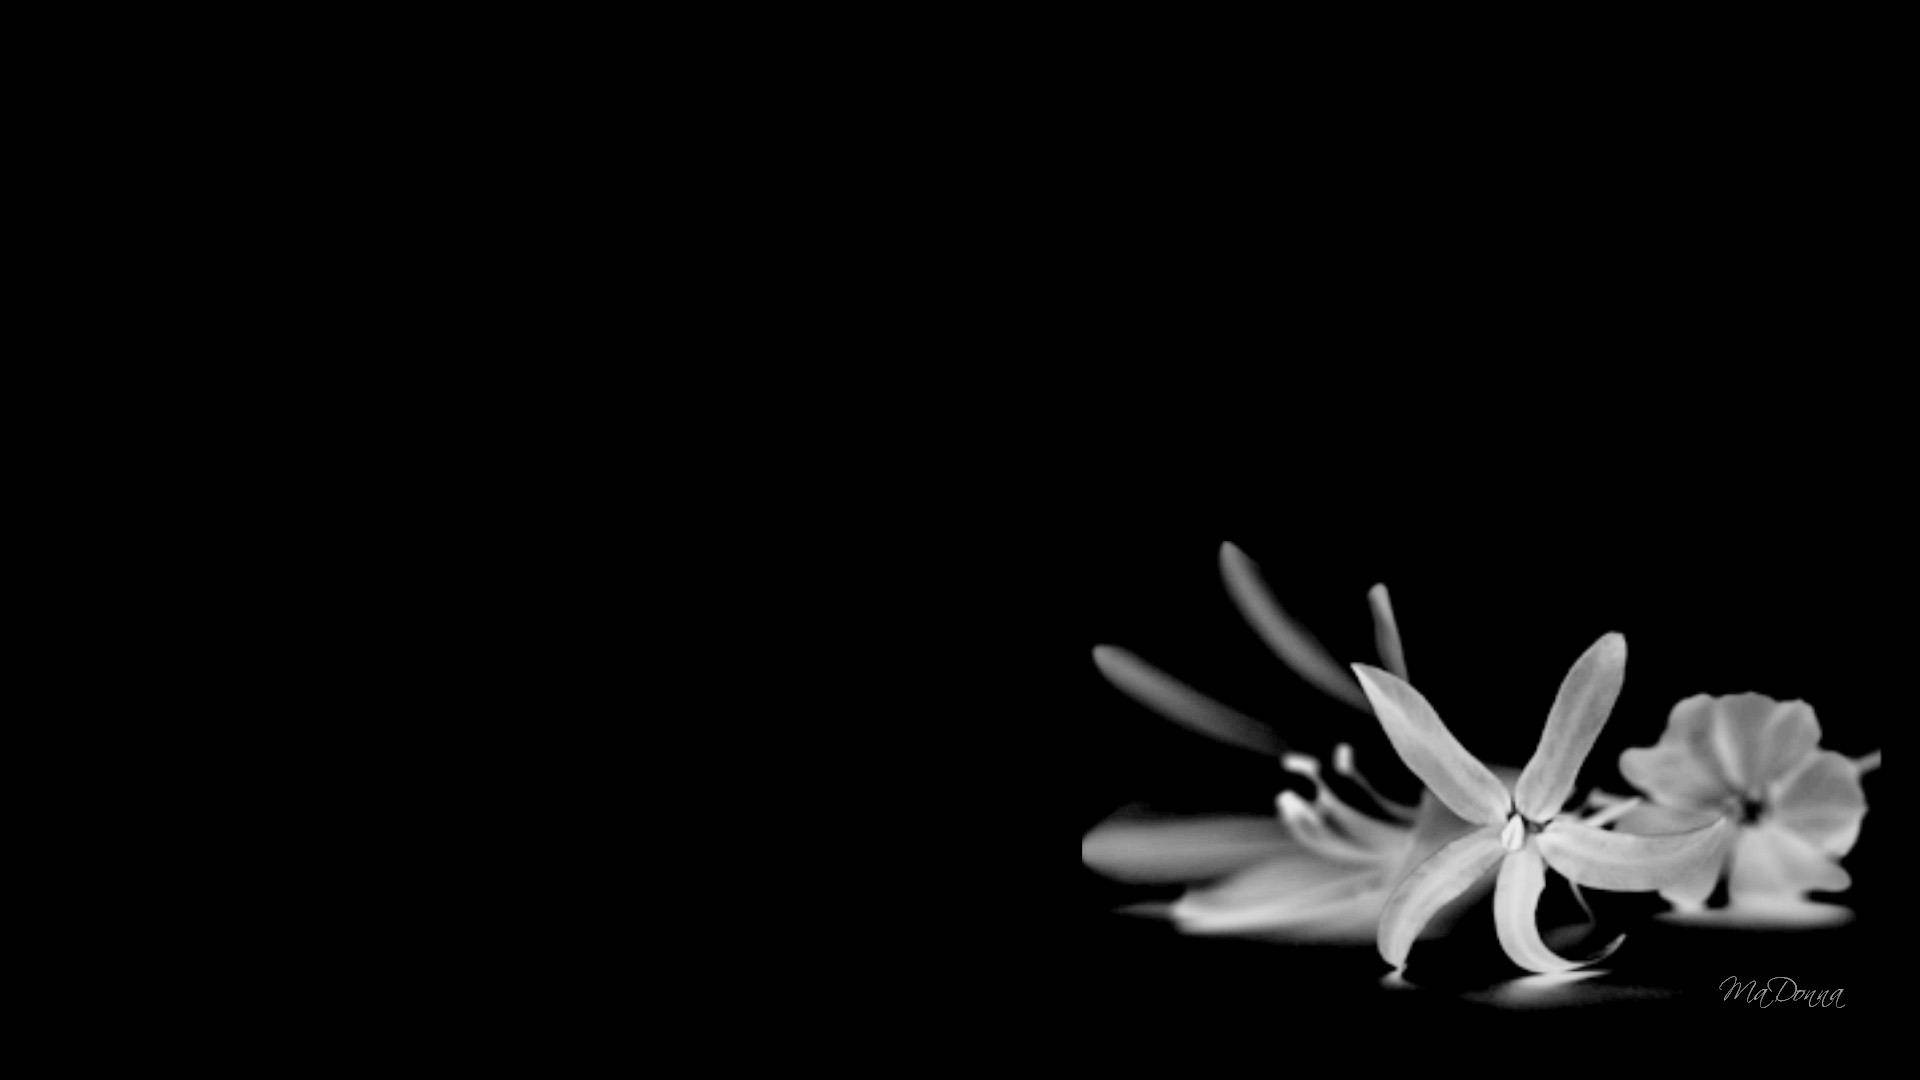 Black And White Flower On The Ground Wallpaper